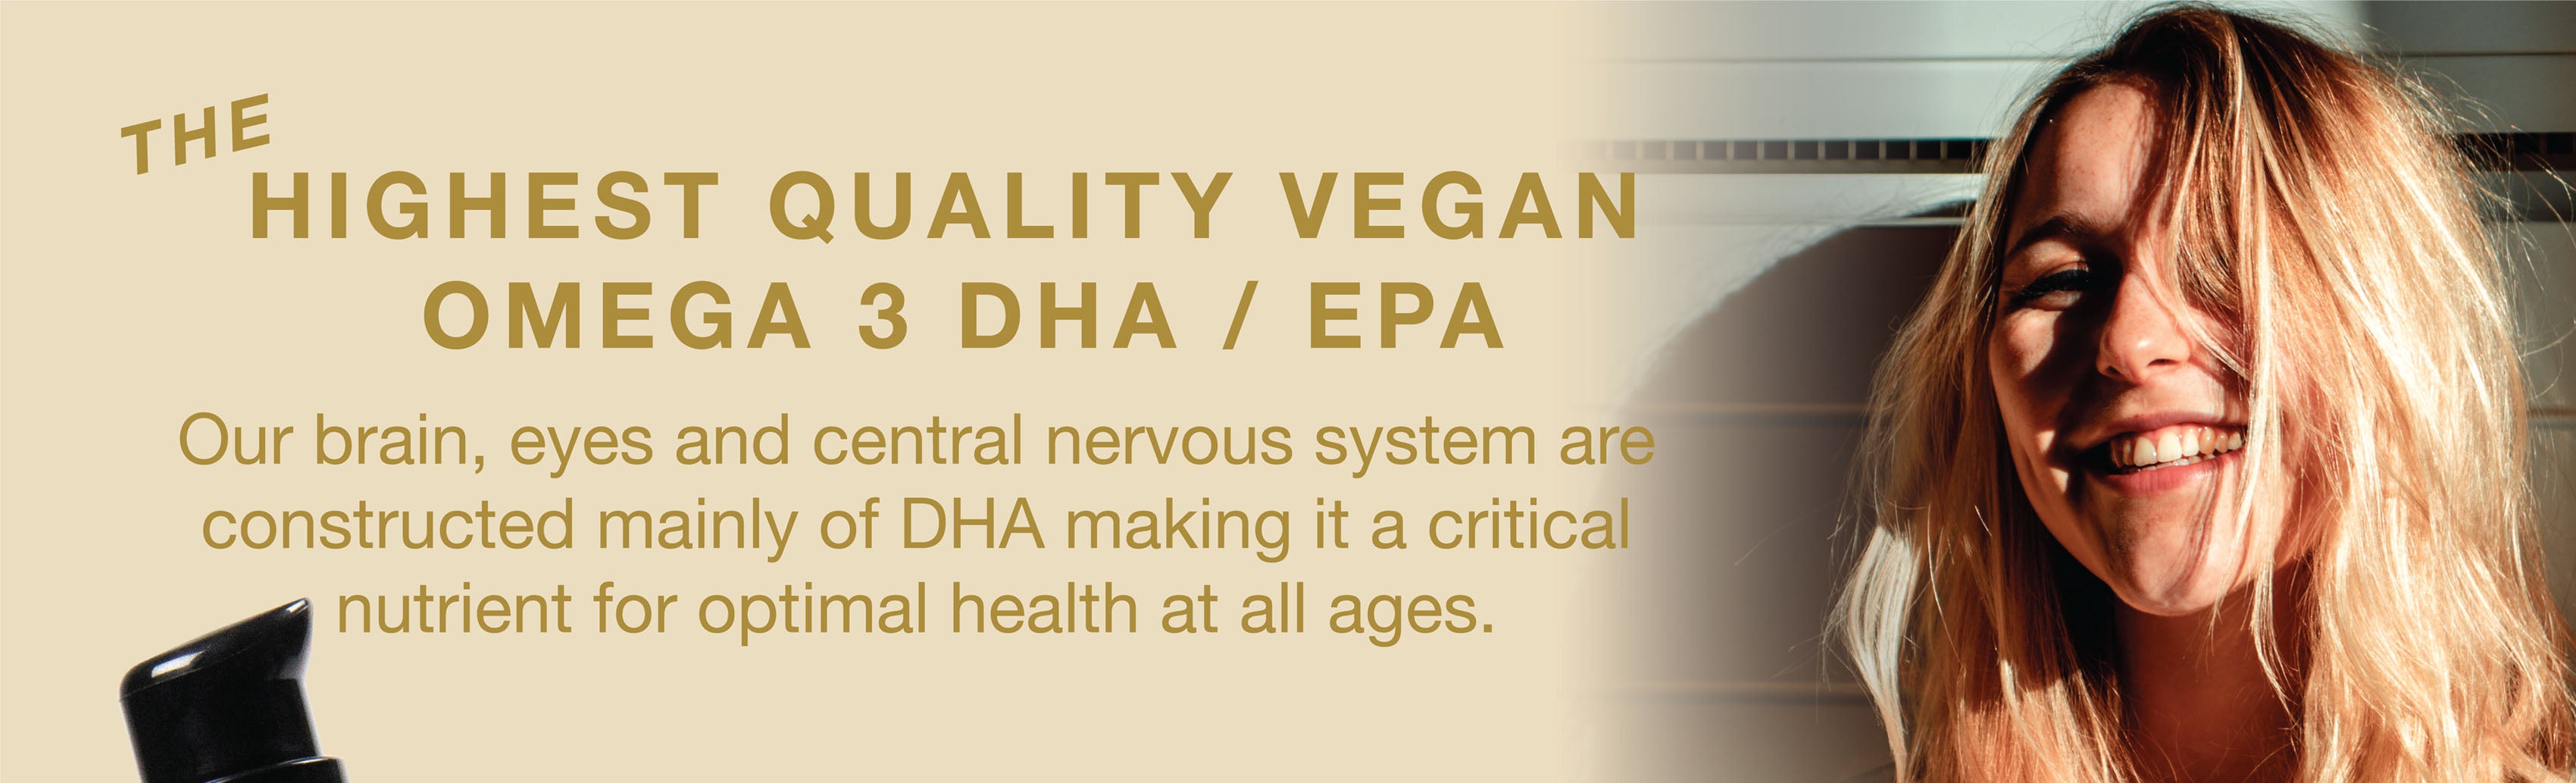 The highest quality vegan omega 3 DHA / EPA for our brains, eyes and central nervous system.